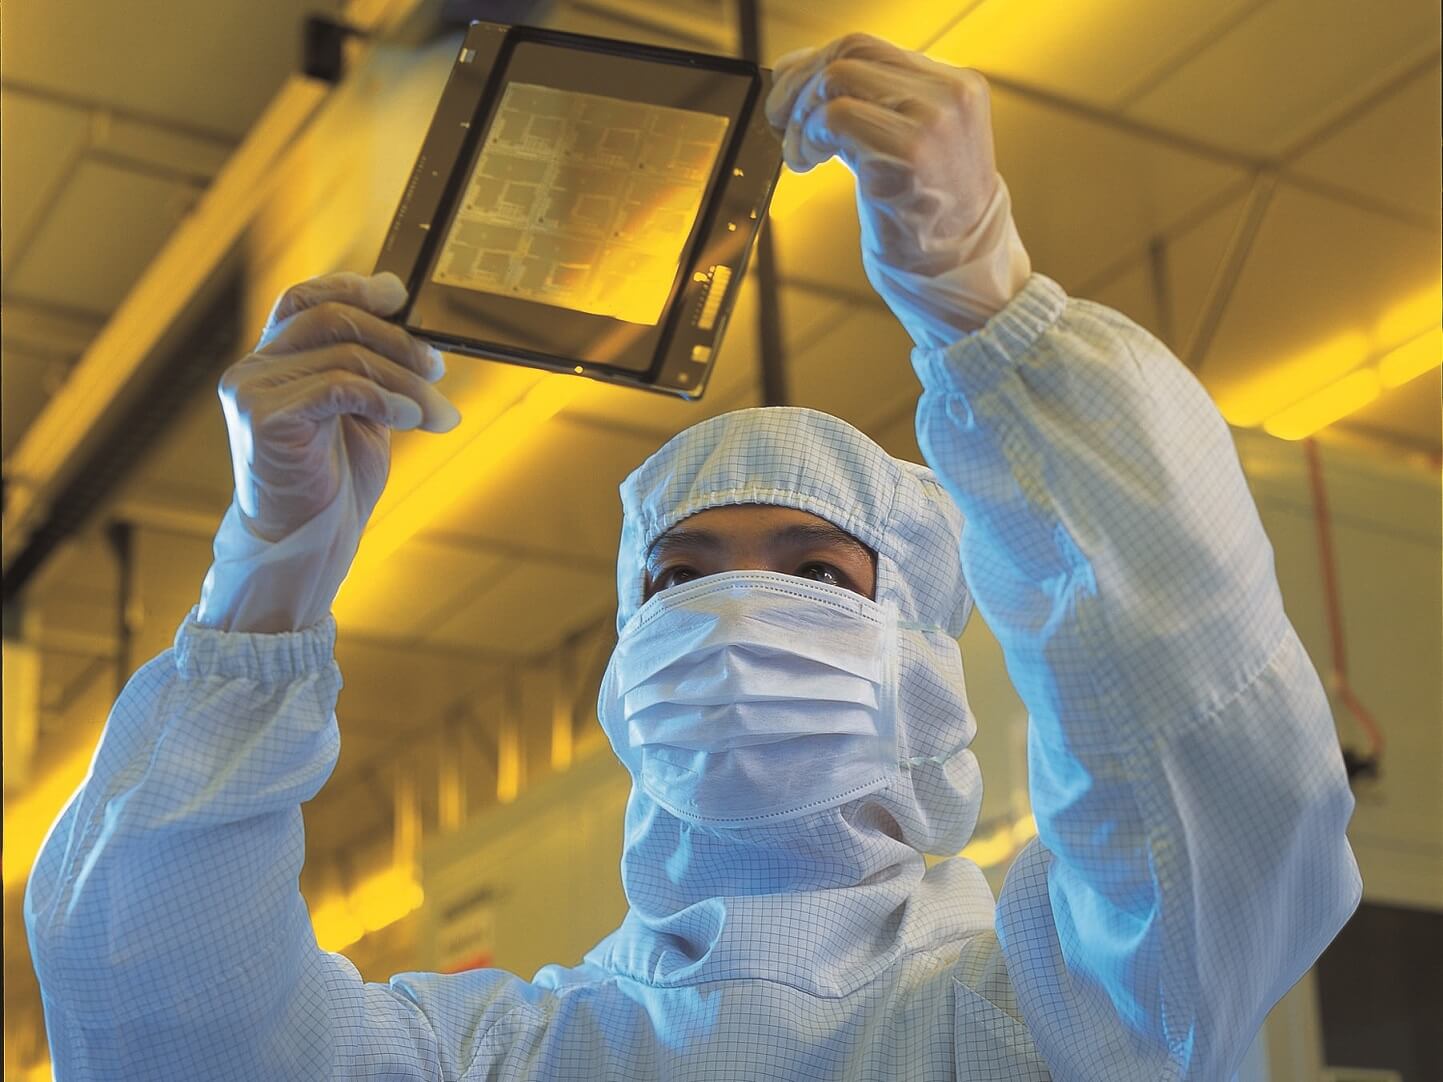 TSMC receives bad chemicals, stopping production for Nvidia and Huawei chips